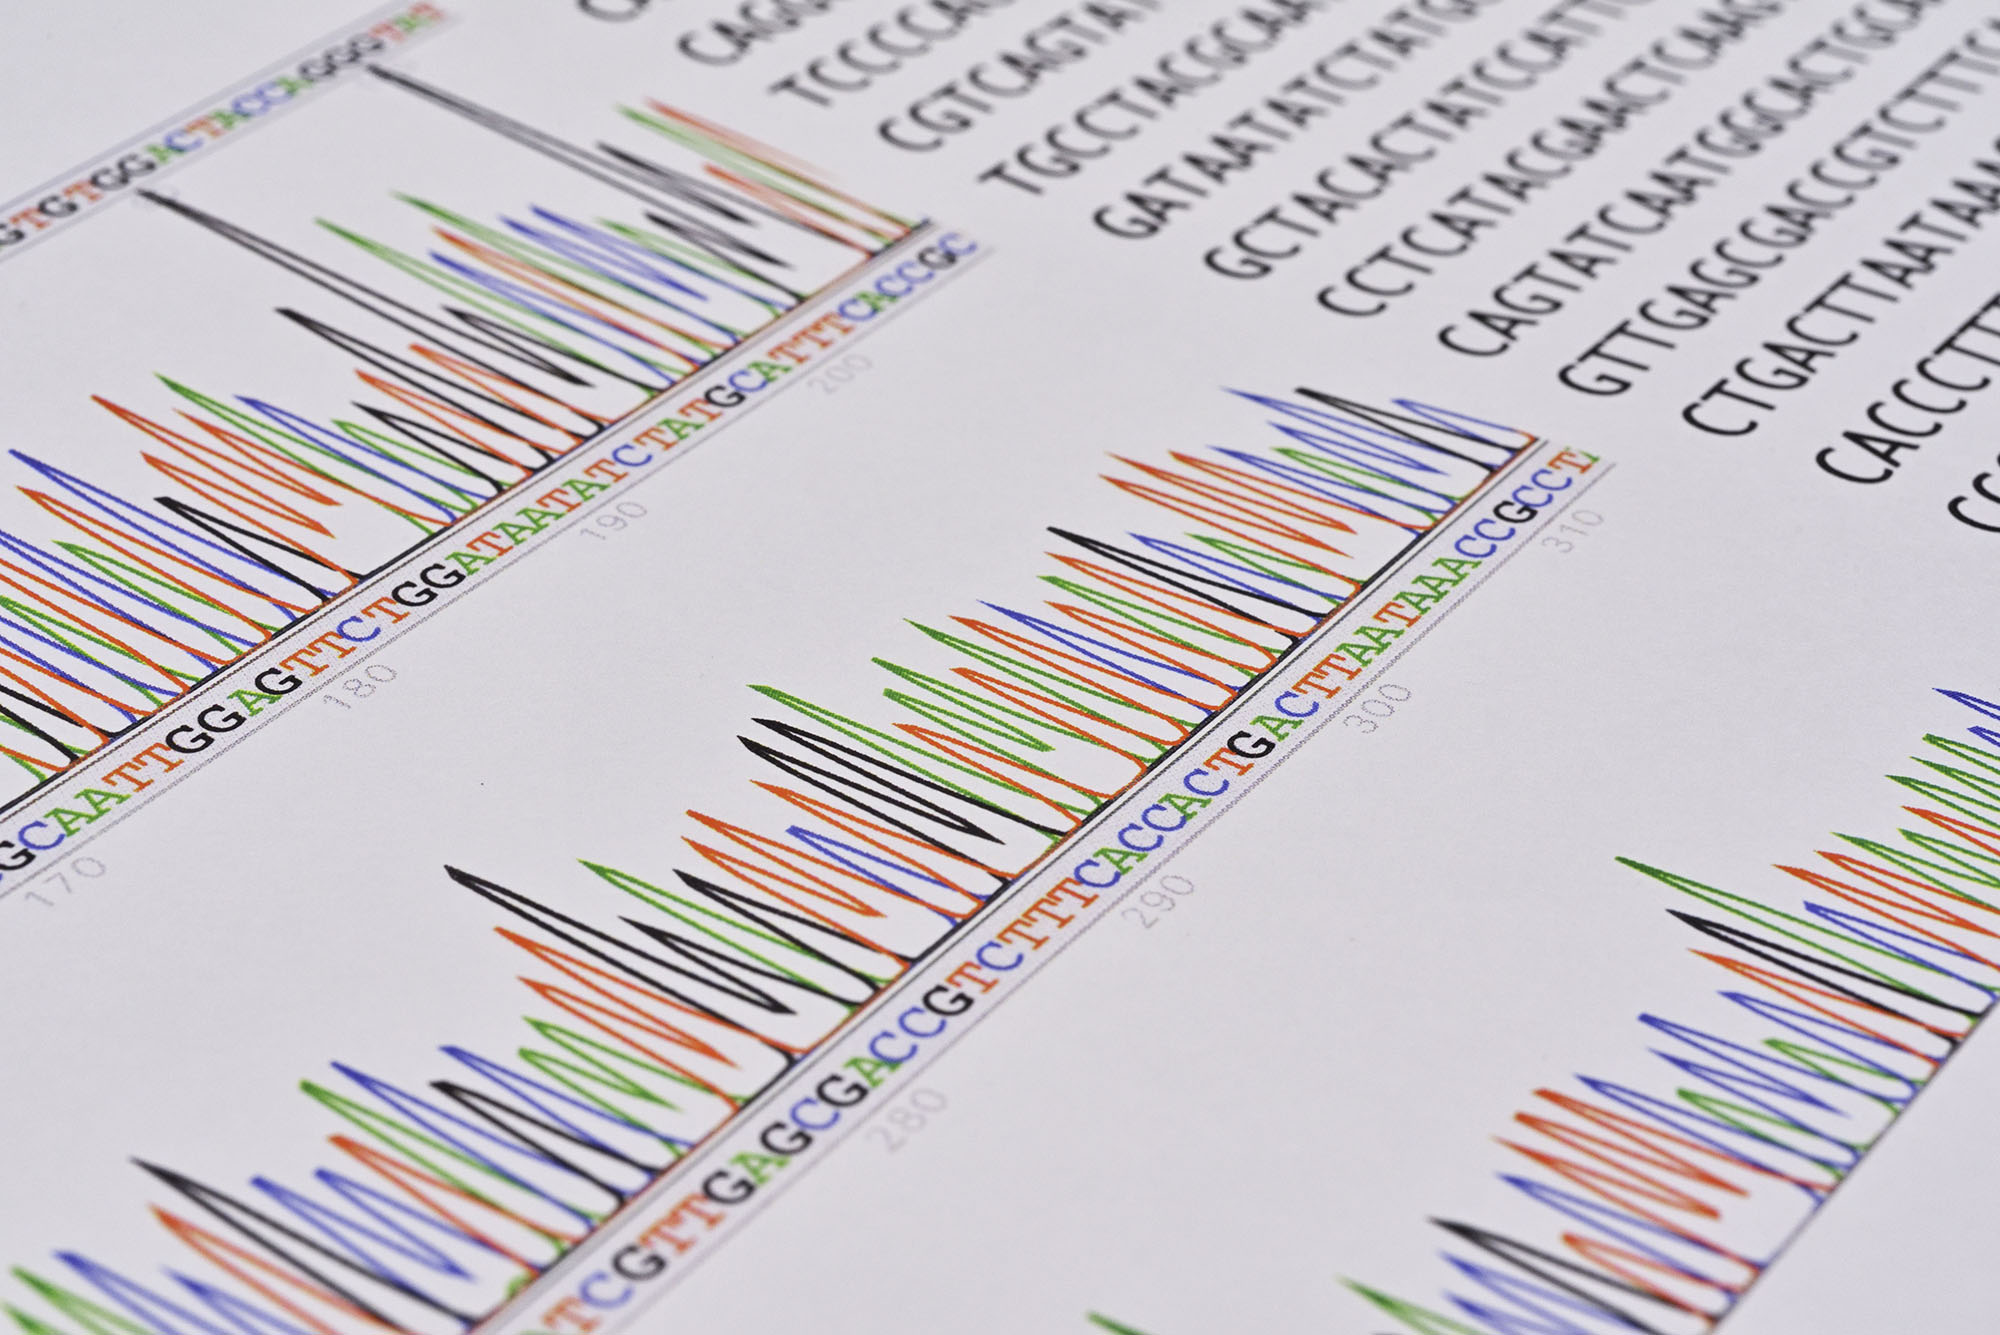 BioSODA: An intuitive search function for bioinformatics databases